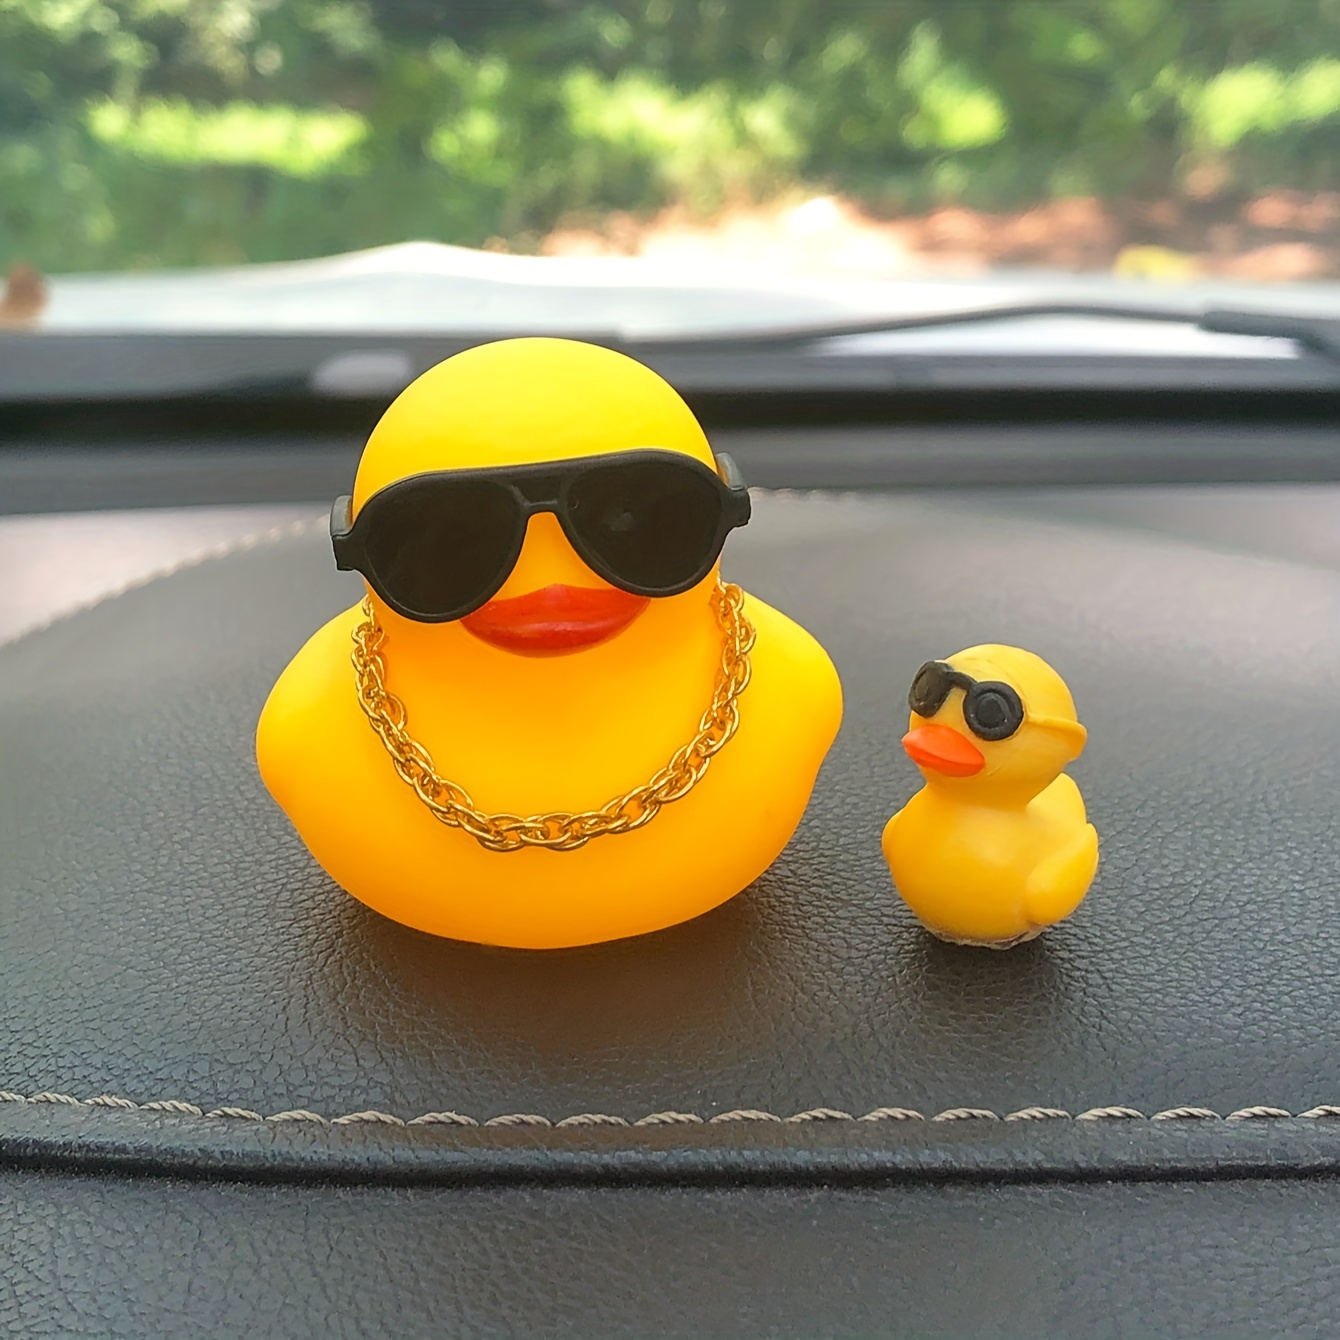 LUTER 1PC Rubber Duck Car Duck Decoration Dashboard, Little Yellow Rubber  Duck with Gold Chain Hats and Donut Sunglasses for Car Office Bedroom Desk